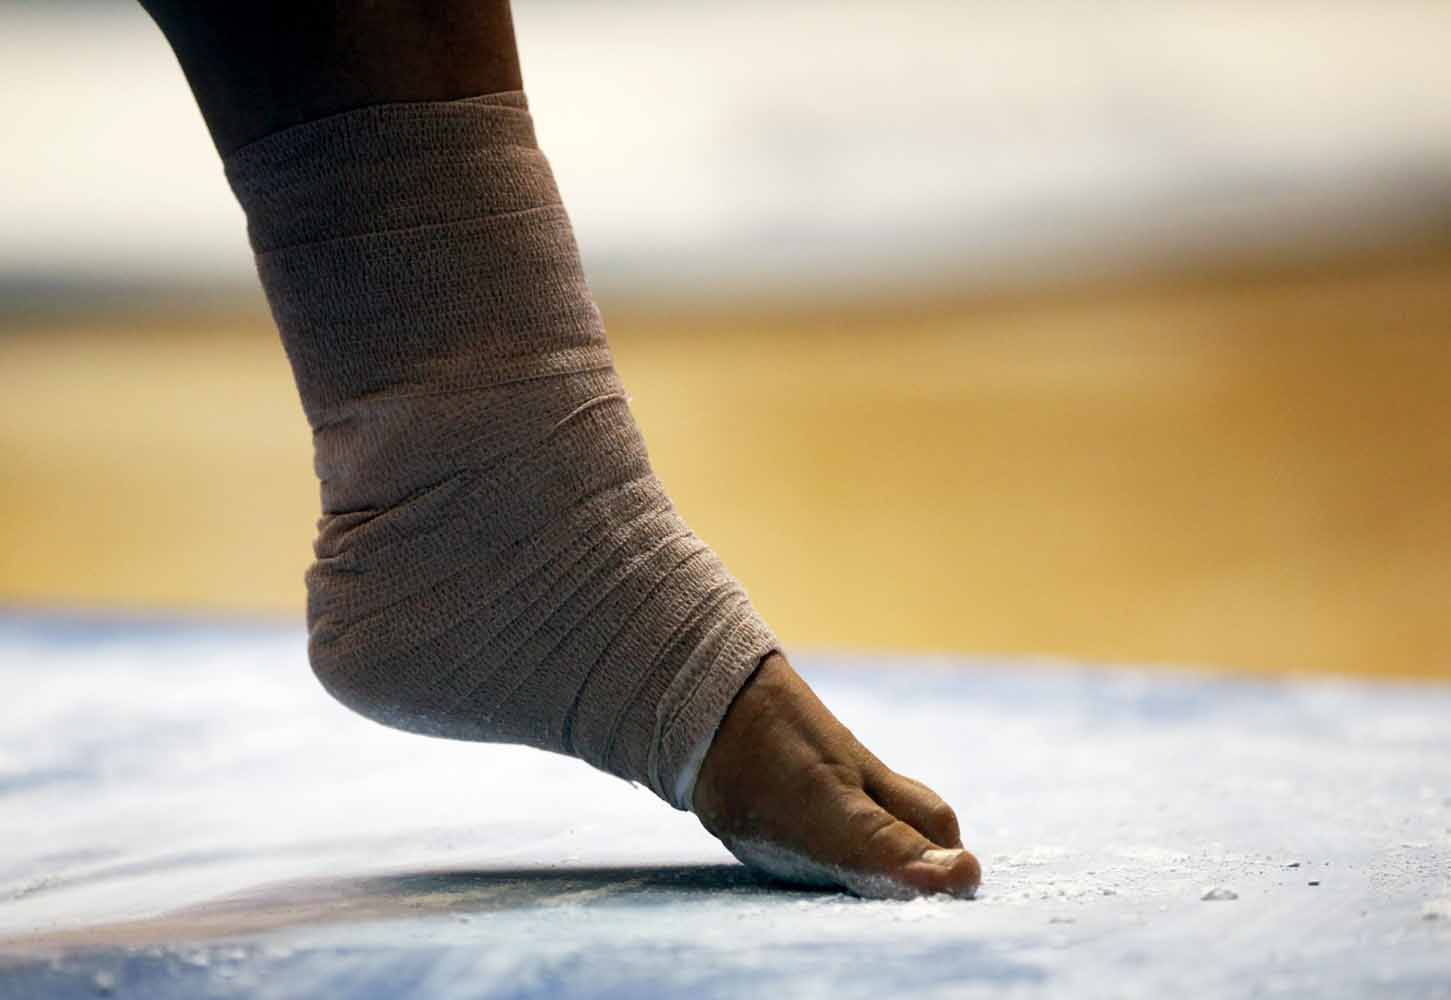 Mizzou sophomore Shauna Miller rubs her toes and the balls of her feet in chalk dust on the mat near the balance beam before her performance Friday evening, Feb. 19, 2016 in the Hearnes Center.